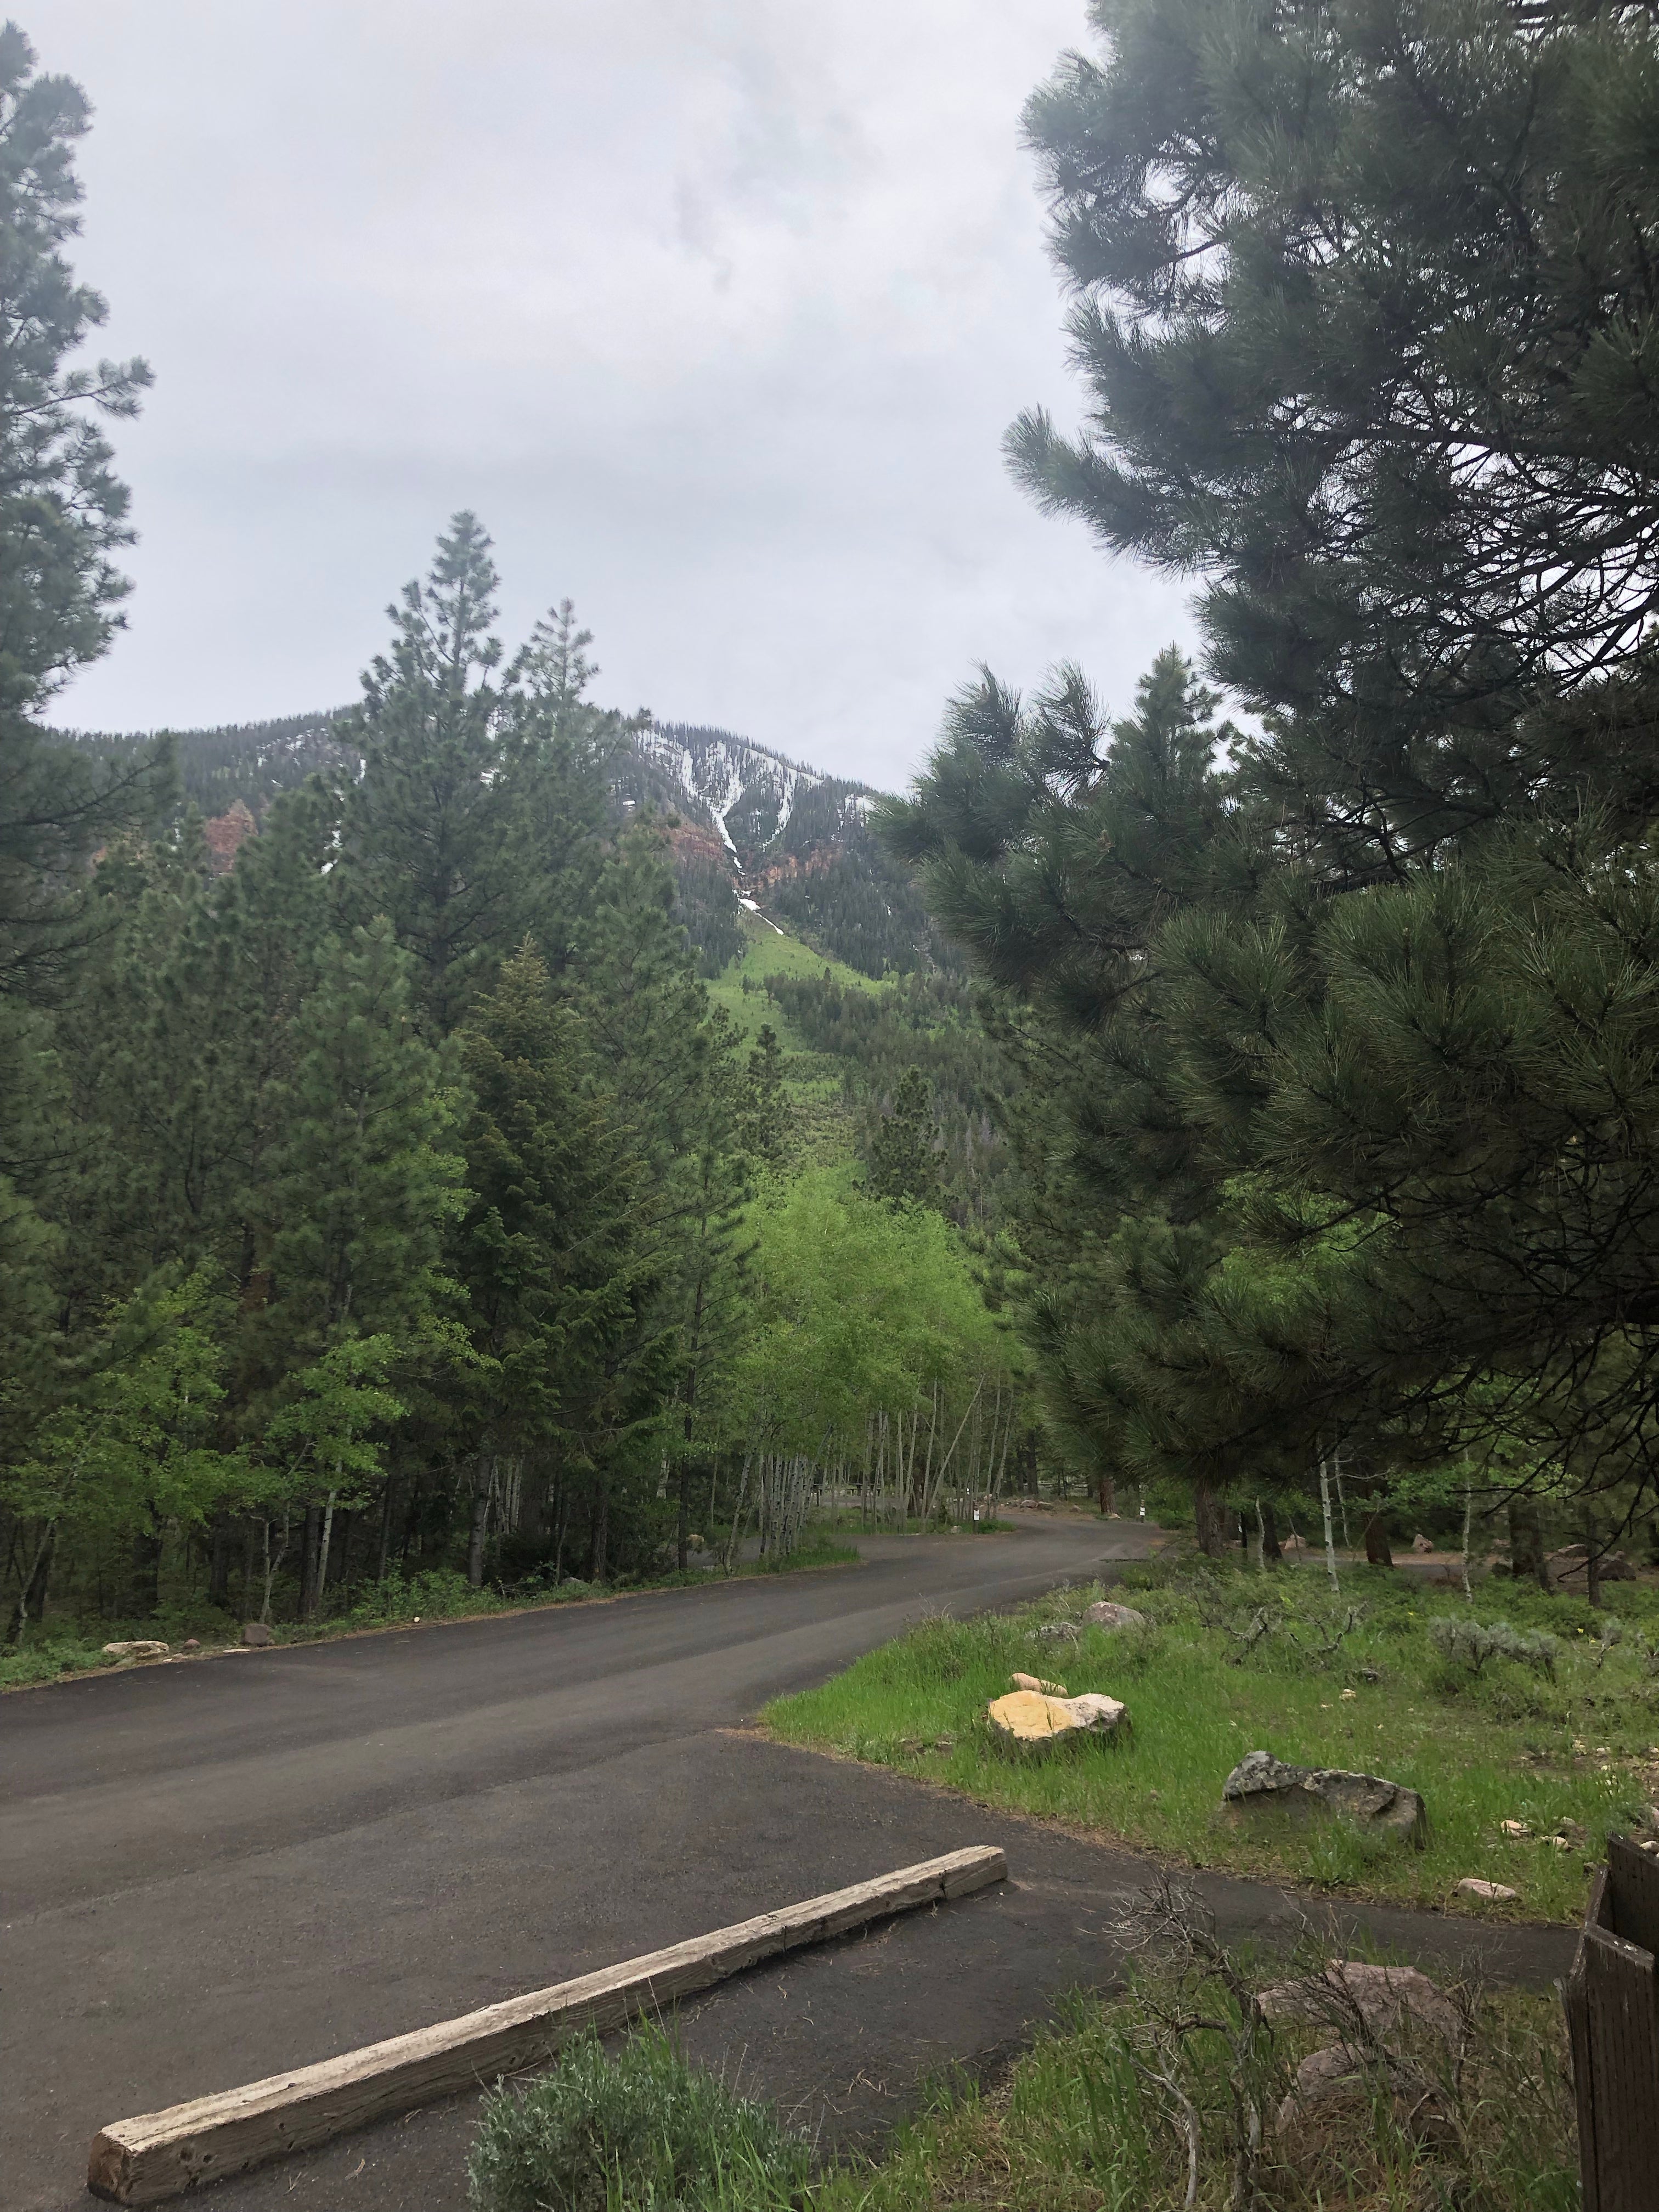 Photo of The campground road and beautiful mountain in the background.